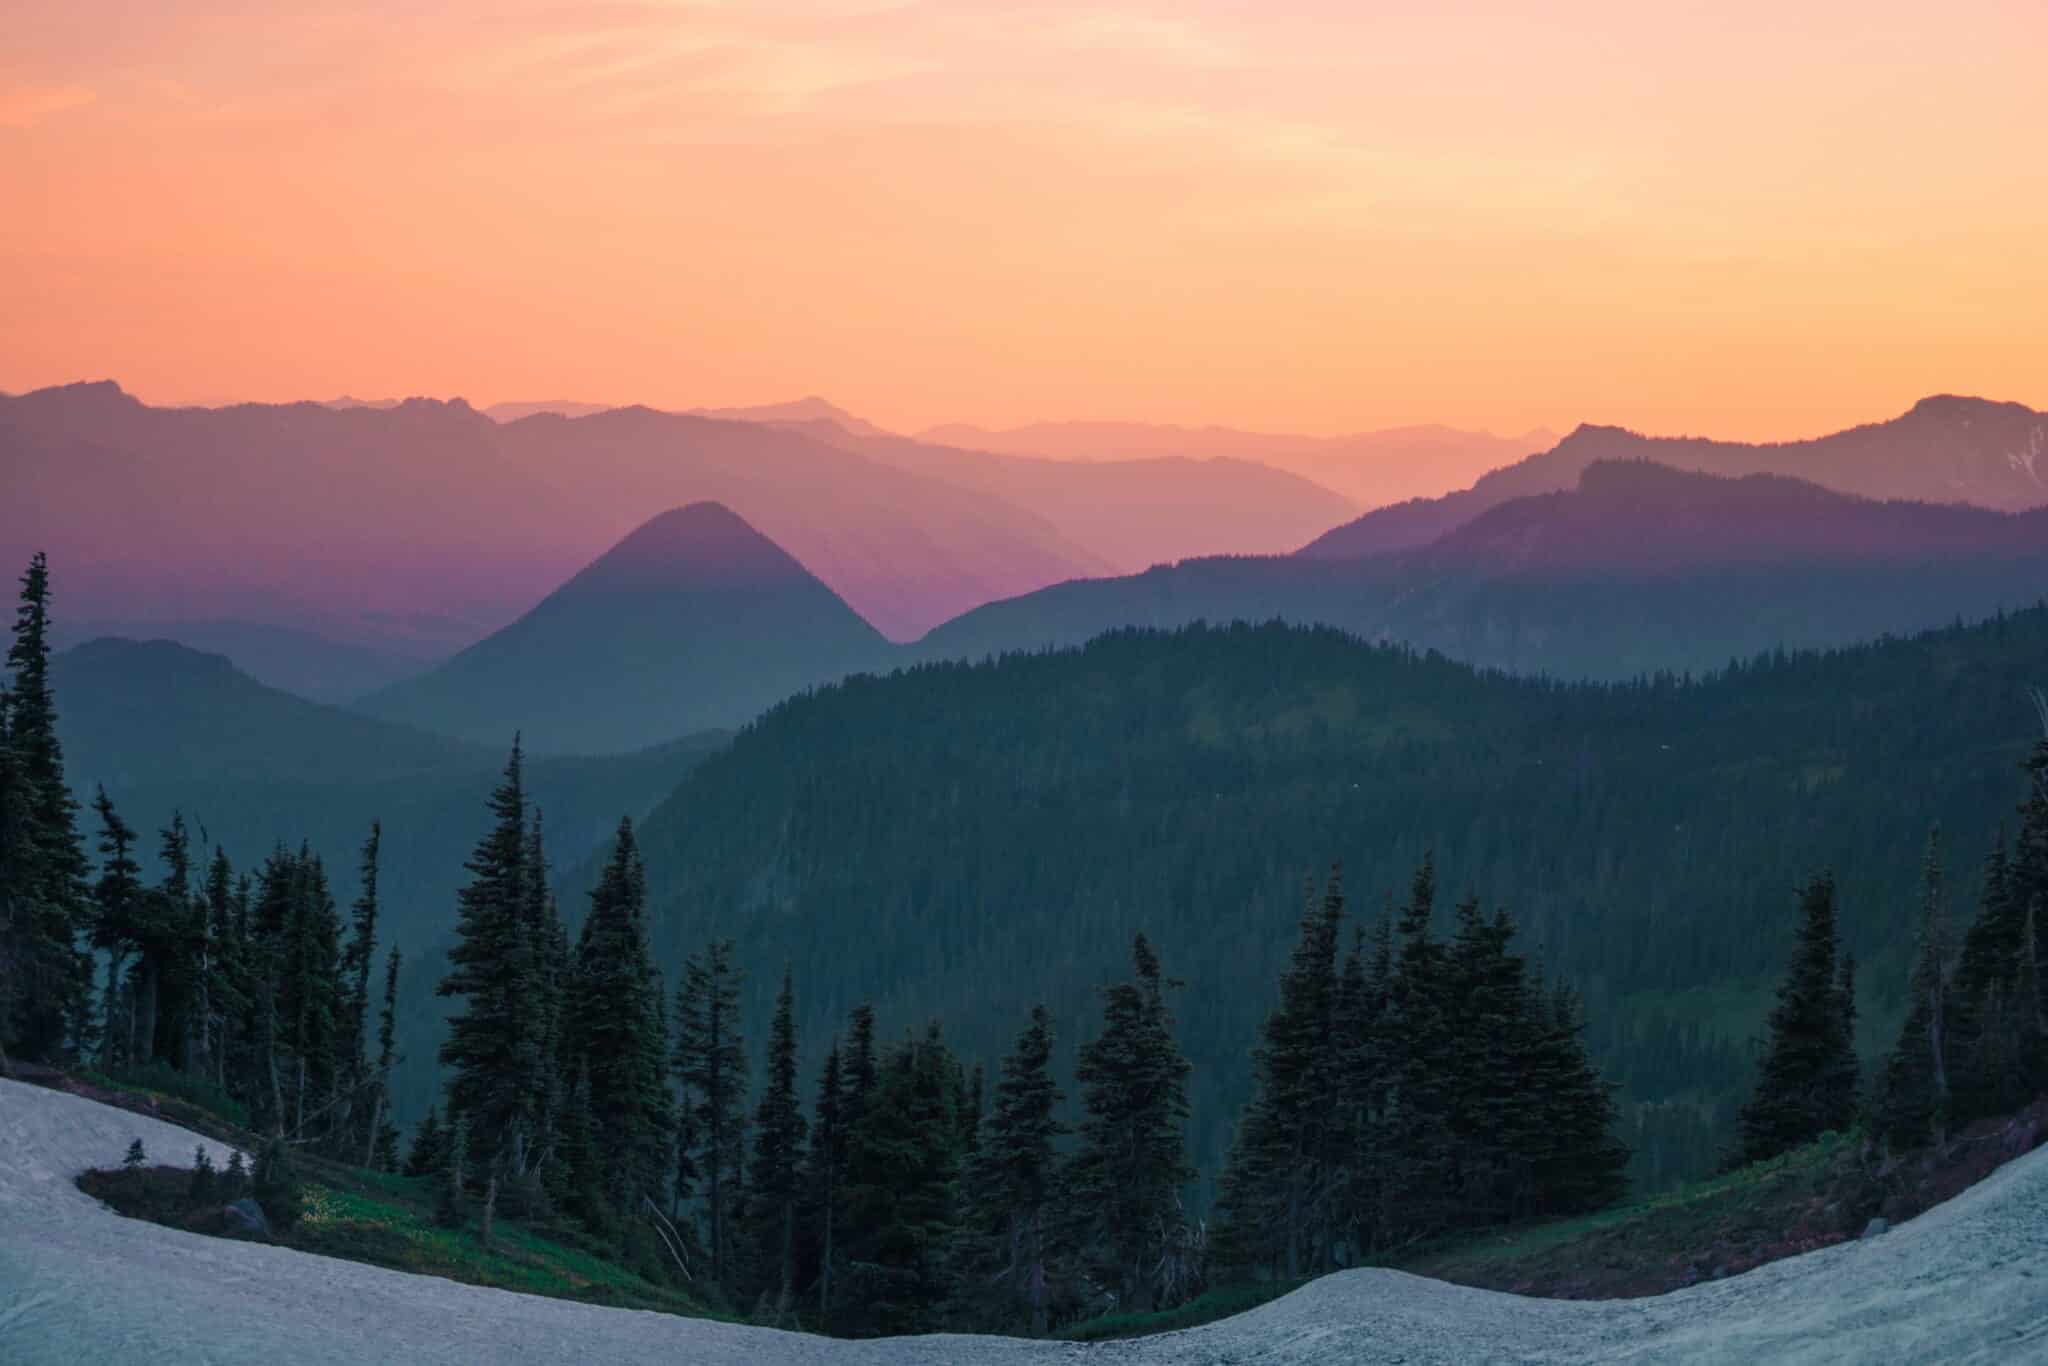 <p>Whether you live in the Seattle area or are visiting the province on vacation, this awe-inspiring road trip to some of the <a href="https://wealthofgeeks.com/lakes-near-me-pacific-northwest/">Pacific Northwest's</a> most awe-inspiring sites is bucket-list worthy. From Seattle, travel along I-5 N on the coast to Bellingham, your base for exploring nearby Mount Baker. Continue to North Cascade National Park, Stevens Pass, and Cascade Valley. Next, explore all that the  White Pass Scenic Byway offers, like <a href="https://planneratheart.com/hike-in-national-parks-in-washington-state/" rel="noopener">Mount Rainier National Park</a> and Mount St. Helens National Volcanic Monument, before ending in Portland. This walkable city is known for its food and distinct culture, turning visitors into residents.</p>